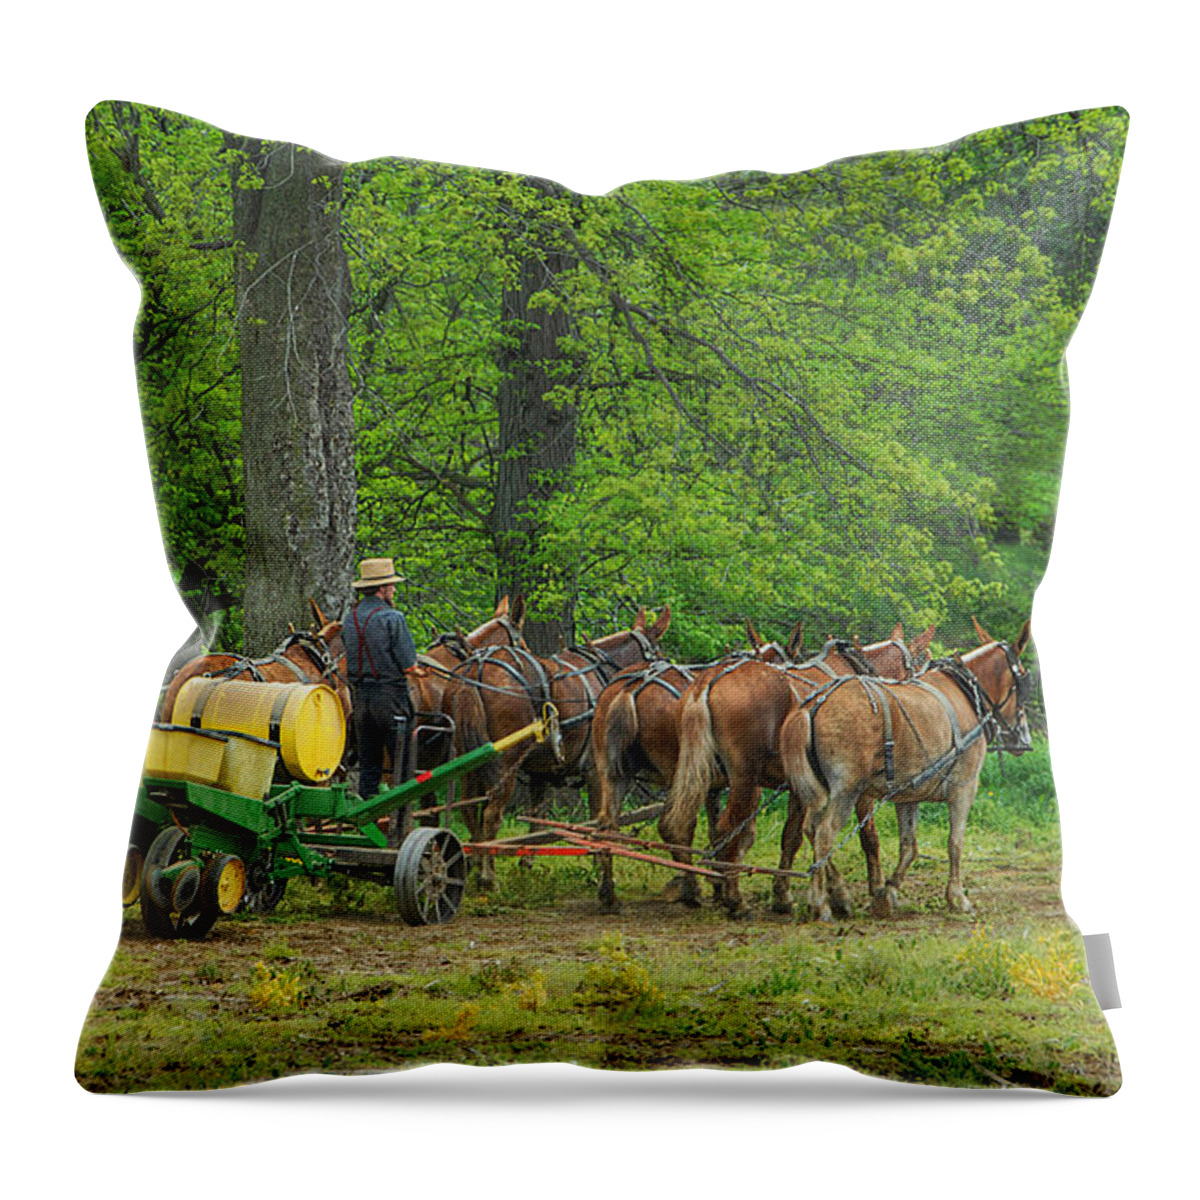 Amish Throw Pillow featuring the photograph Six Mule Team by Dyle  Warren